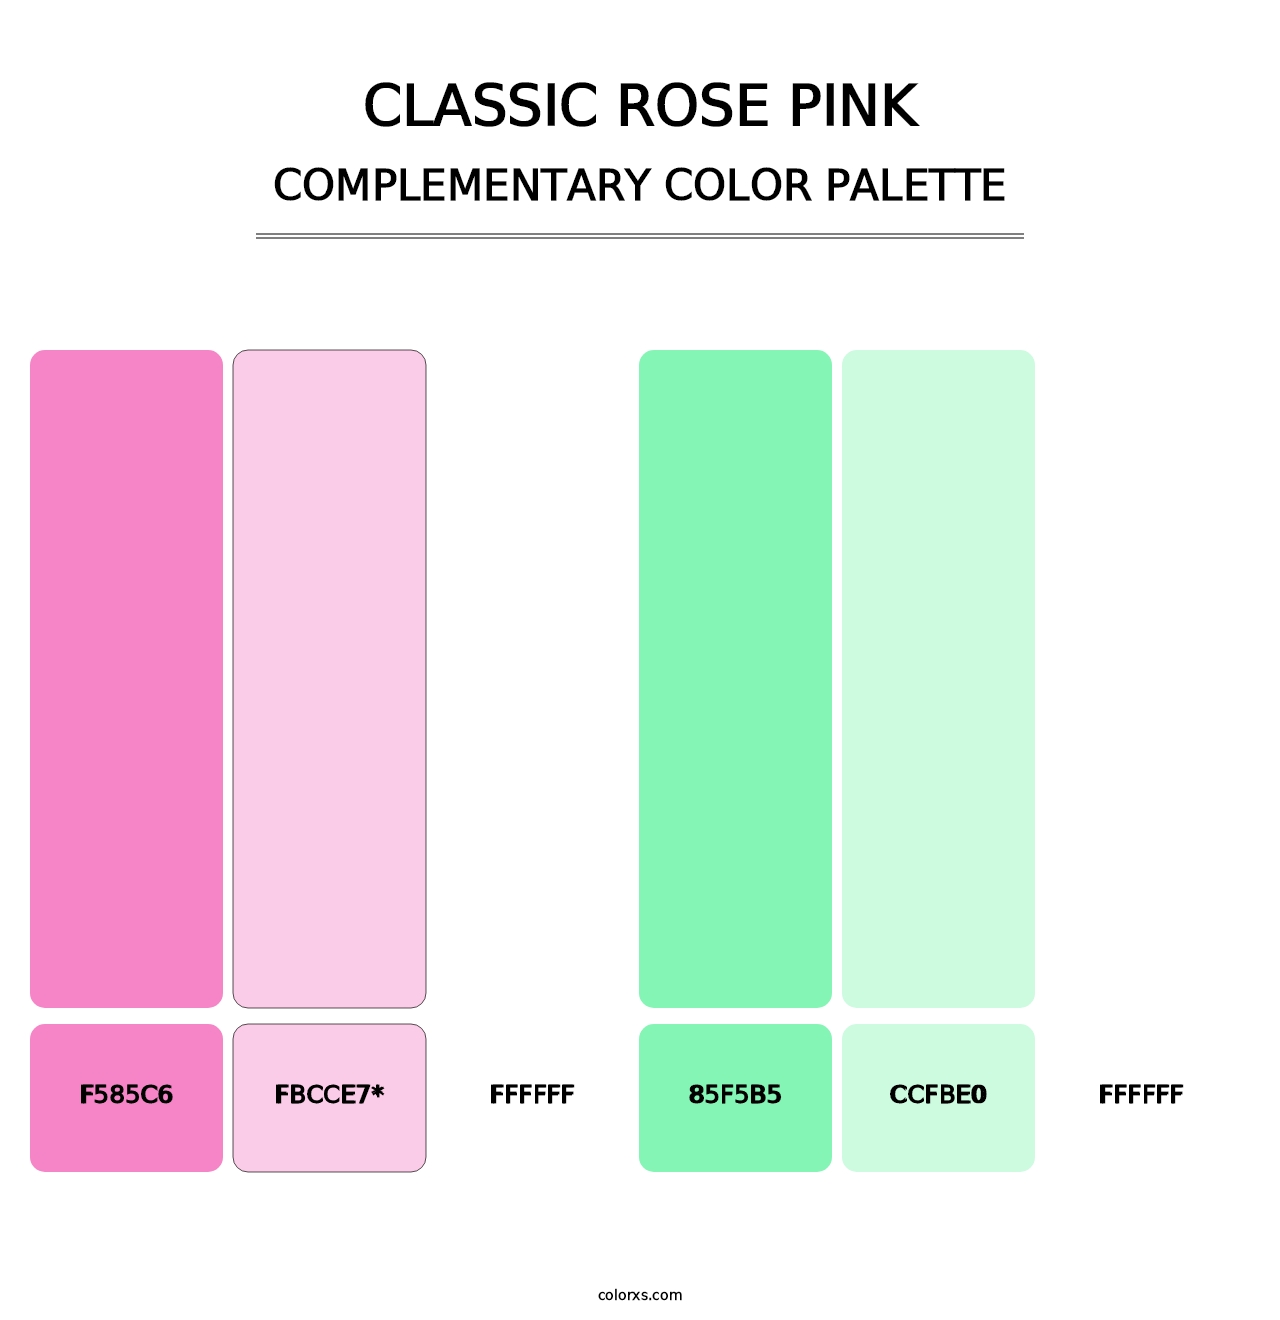 Classic Rose Pink - Complementary Color Palette